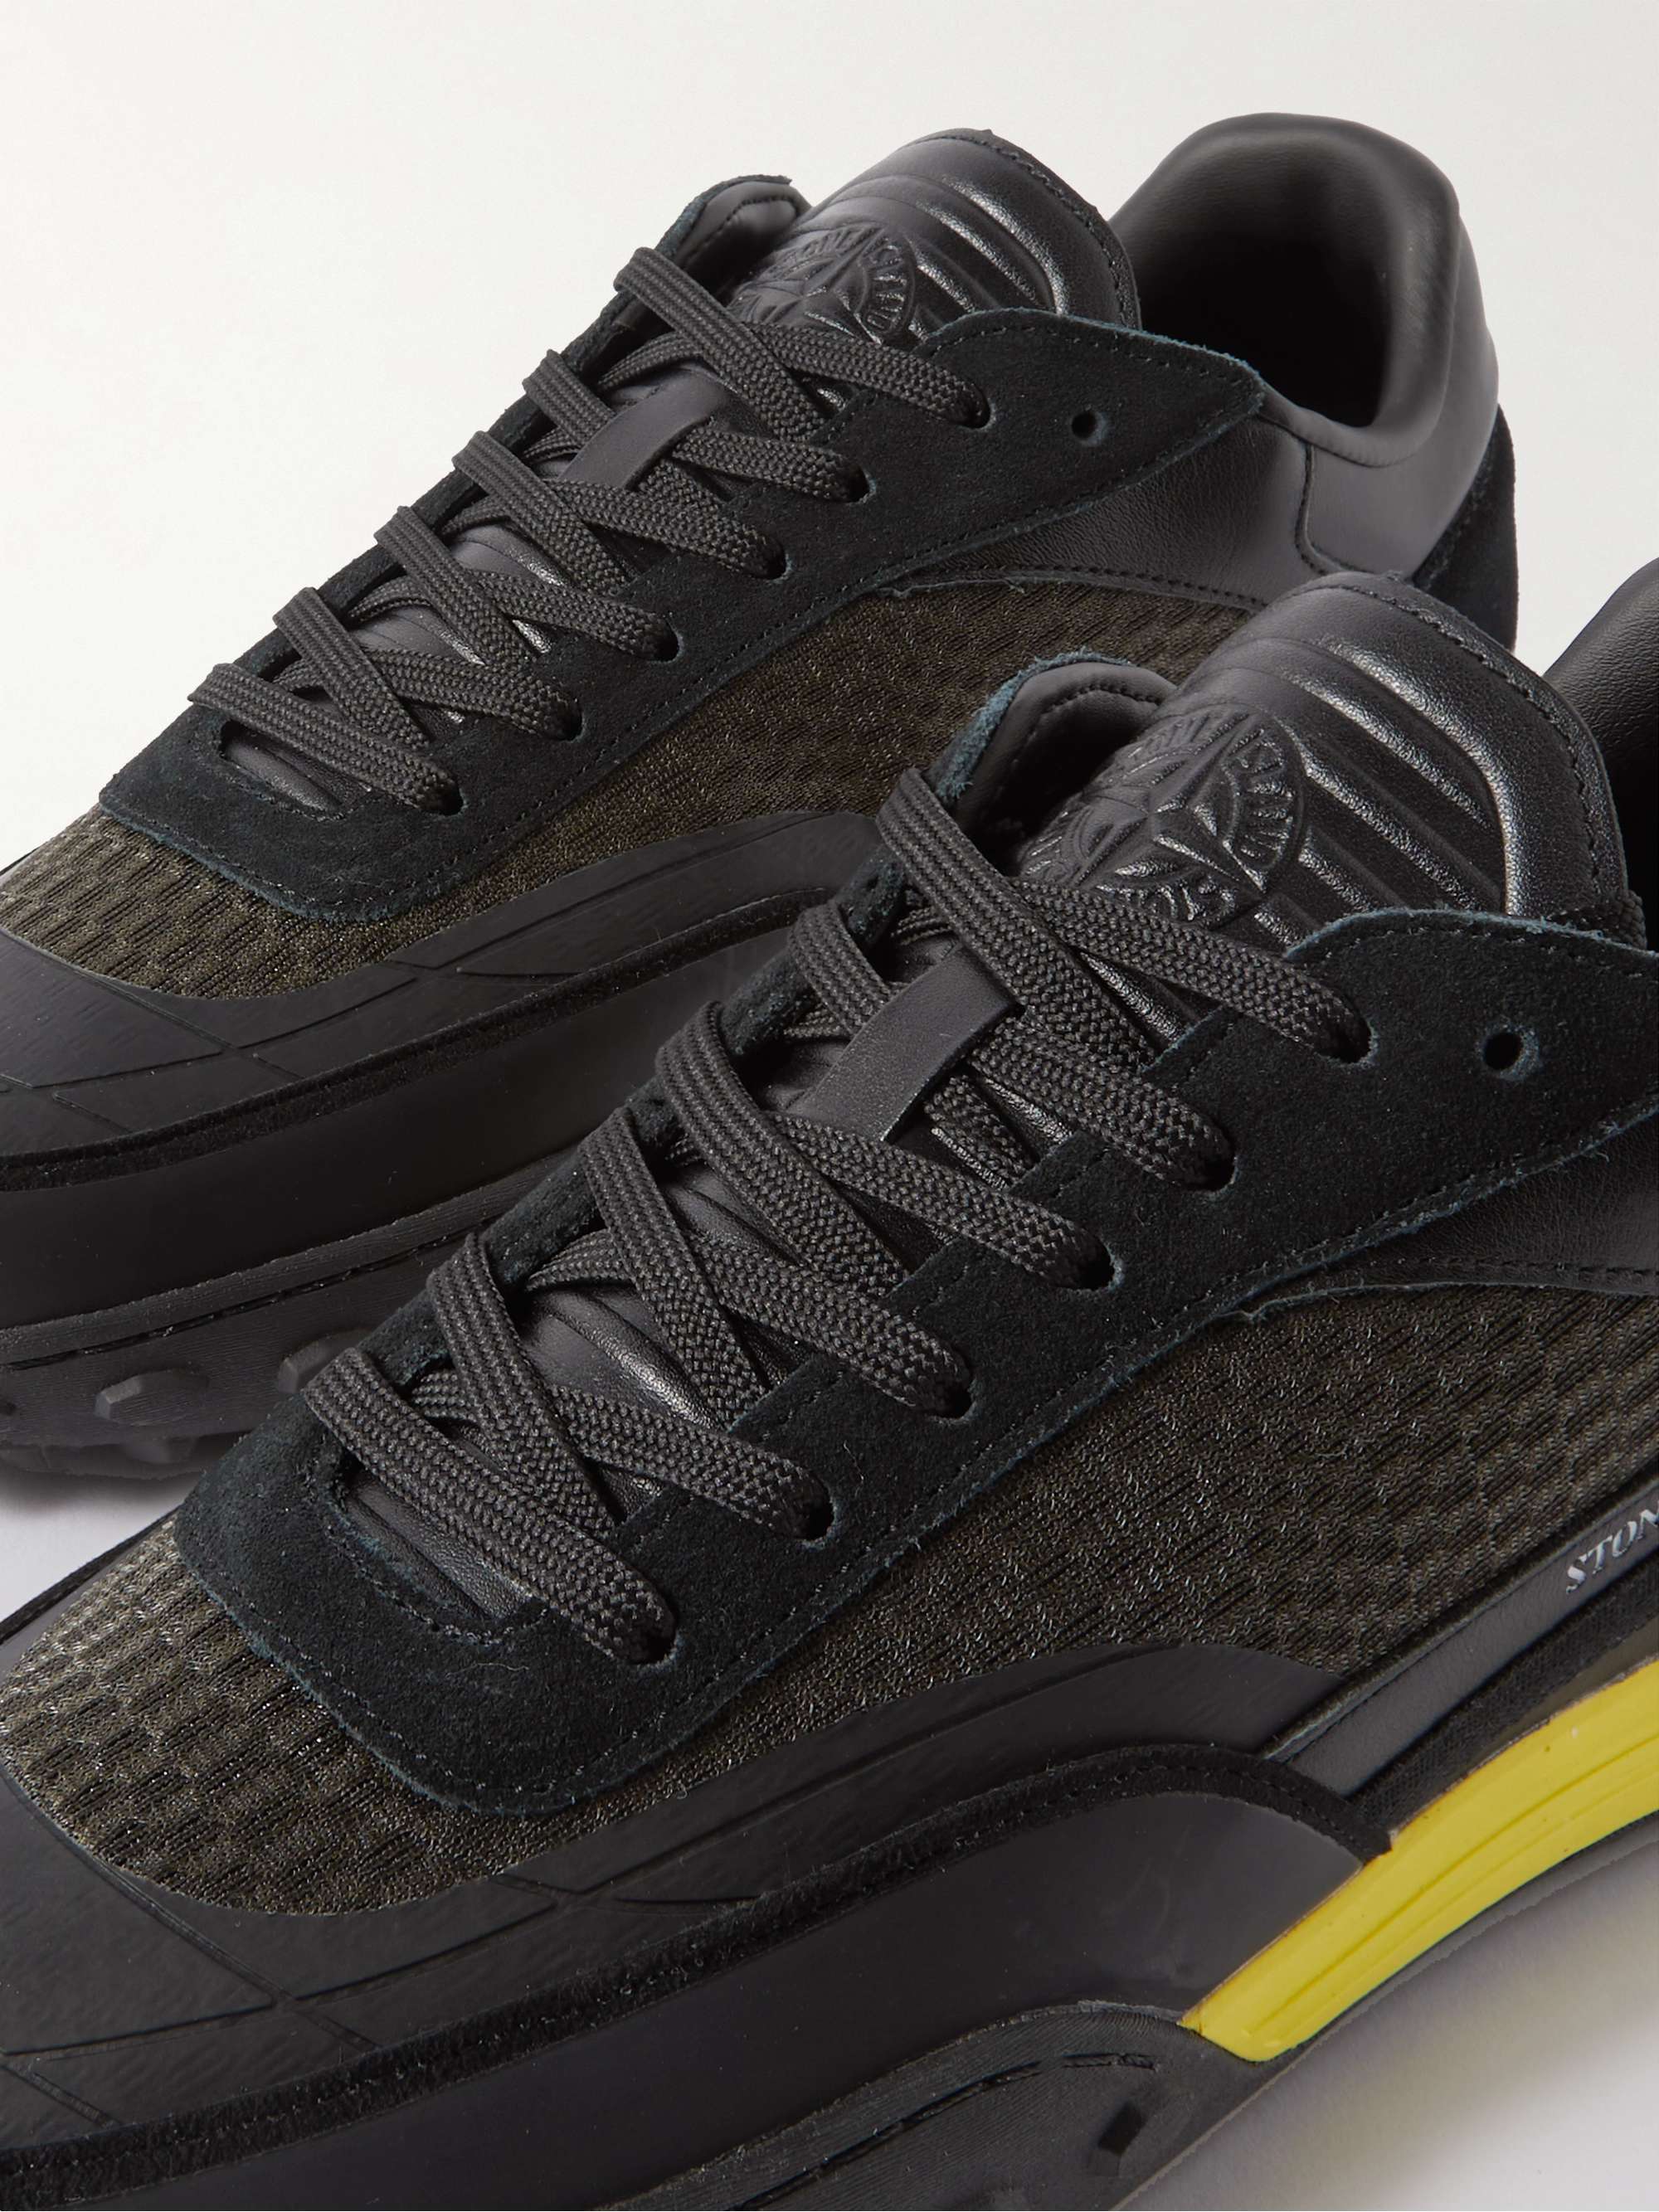 STONE ISLAND Football Logo-Embossed Leather, Suede and Nylon Sneakers